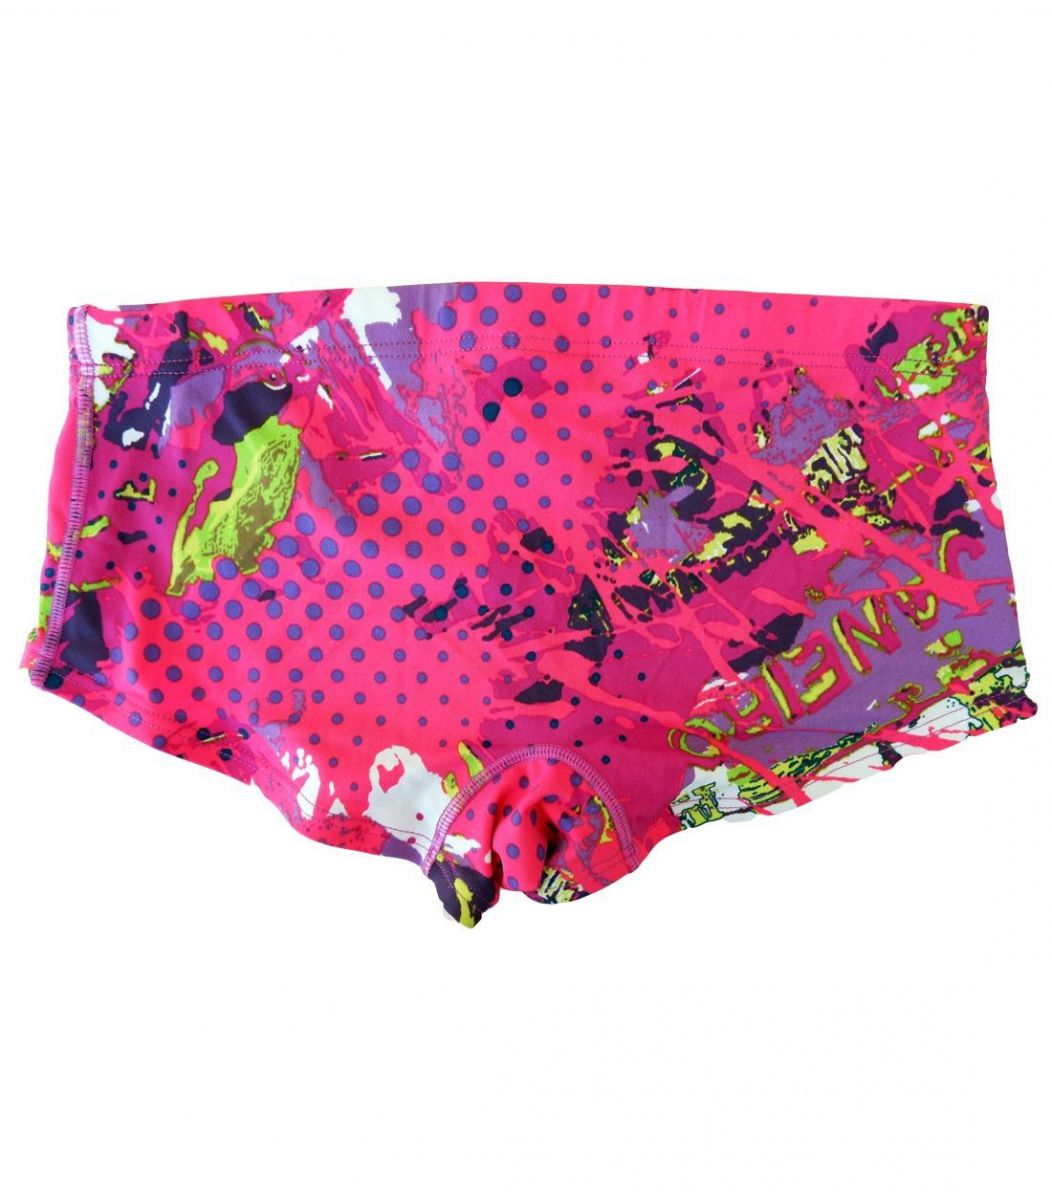 Arena Girl Swimwear Carioca Low Waist Short Size 12yrs old Color Colorful